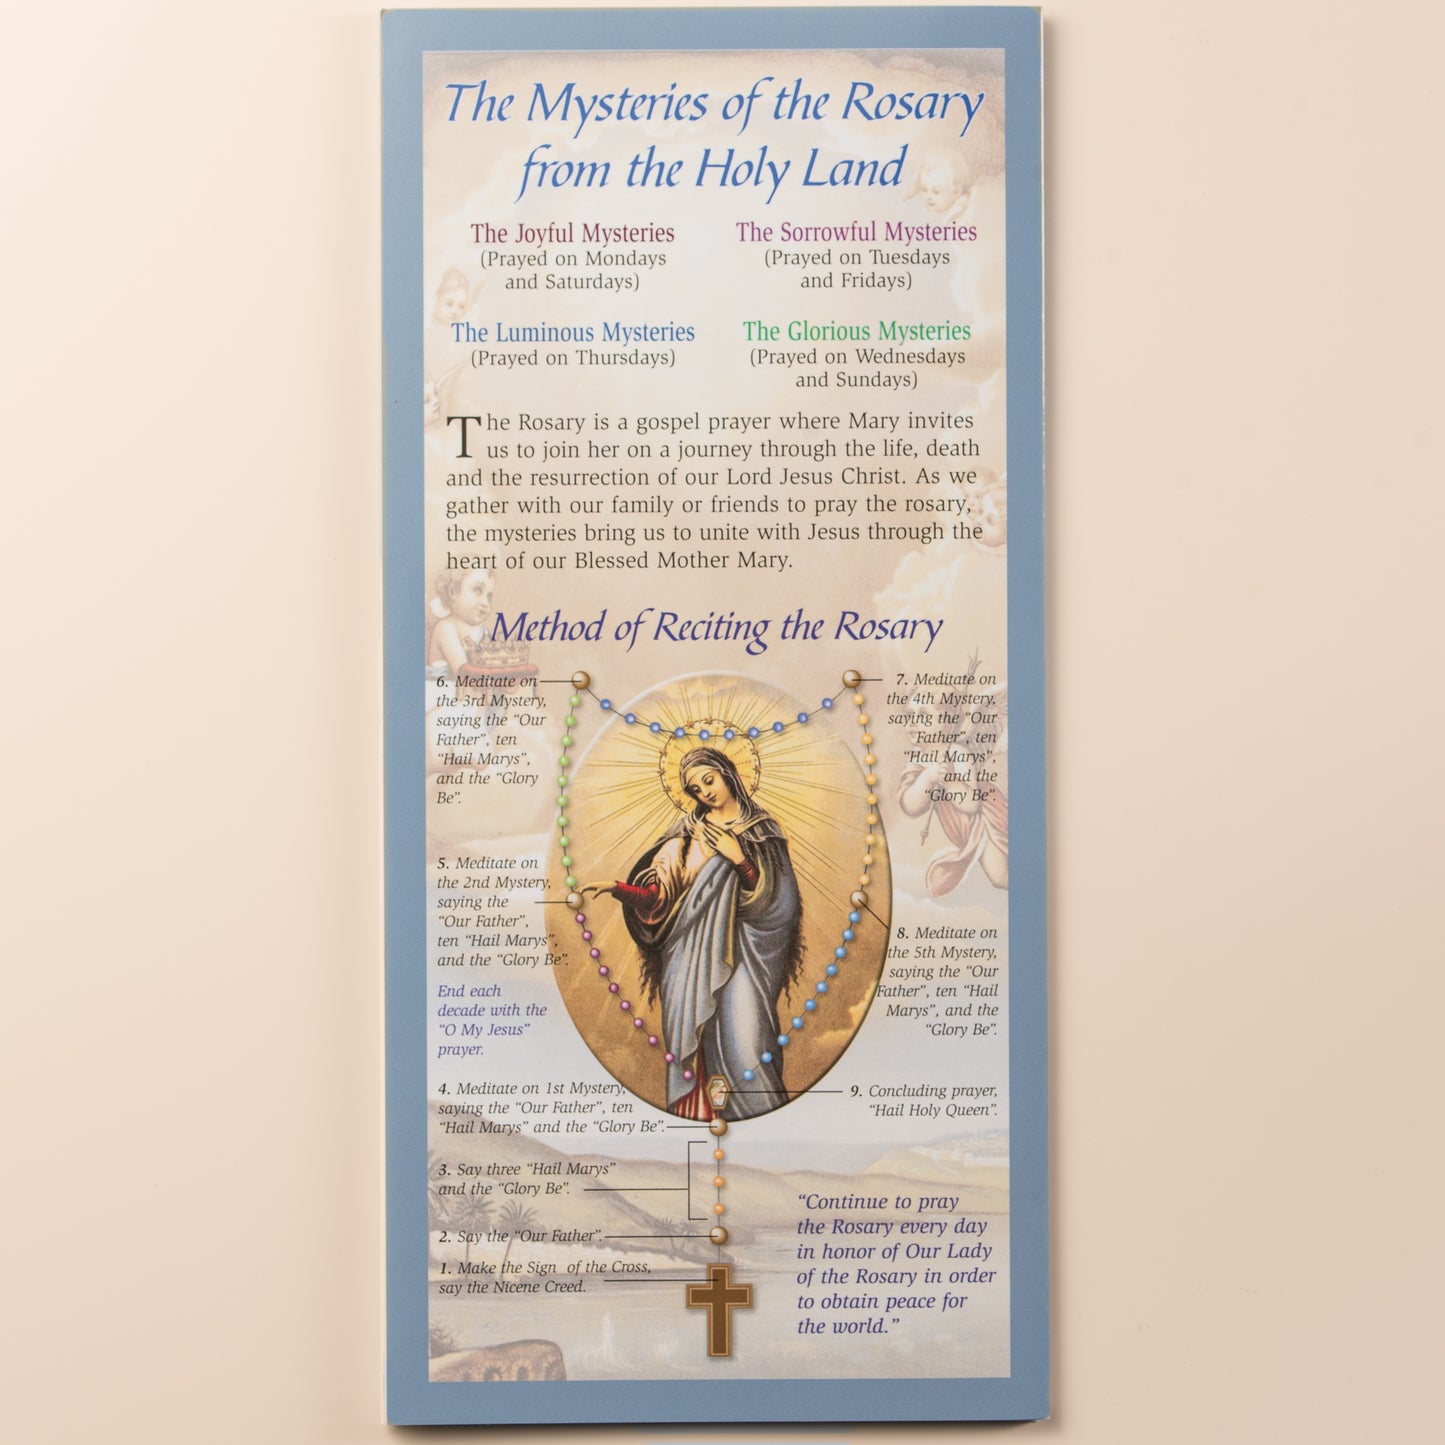 Prayers to The Mysteries of the Rosary